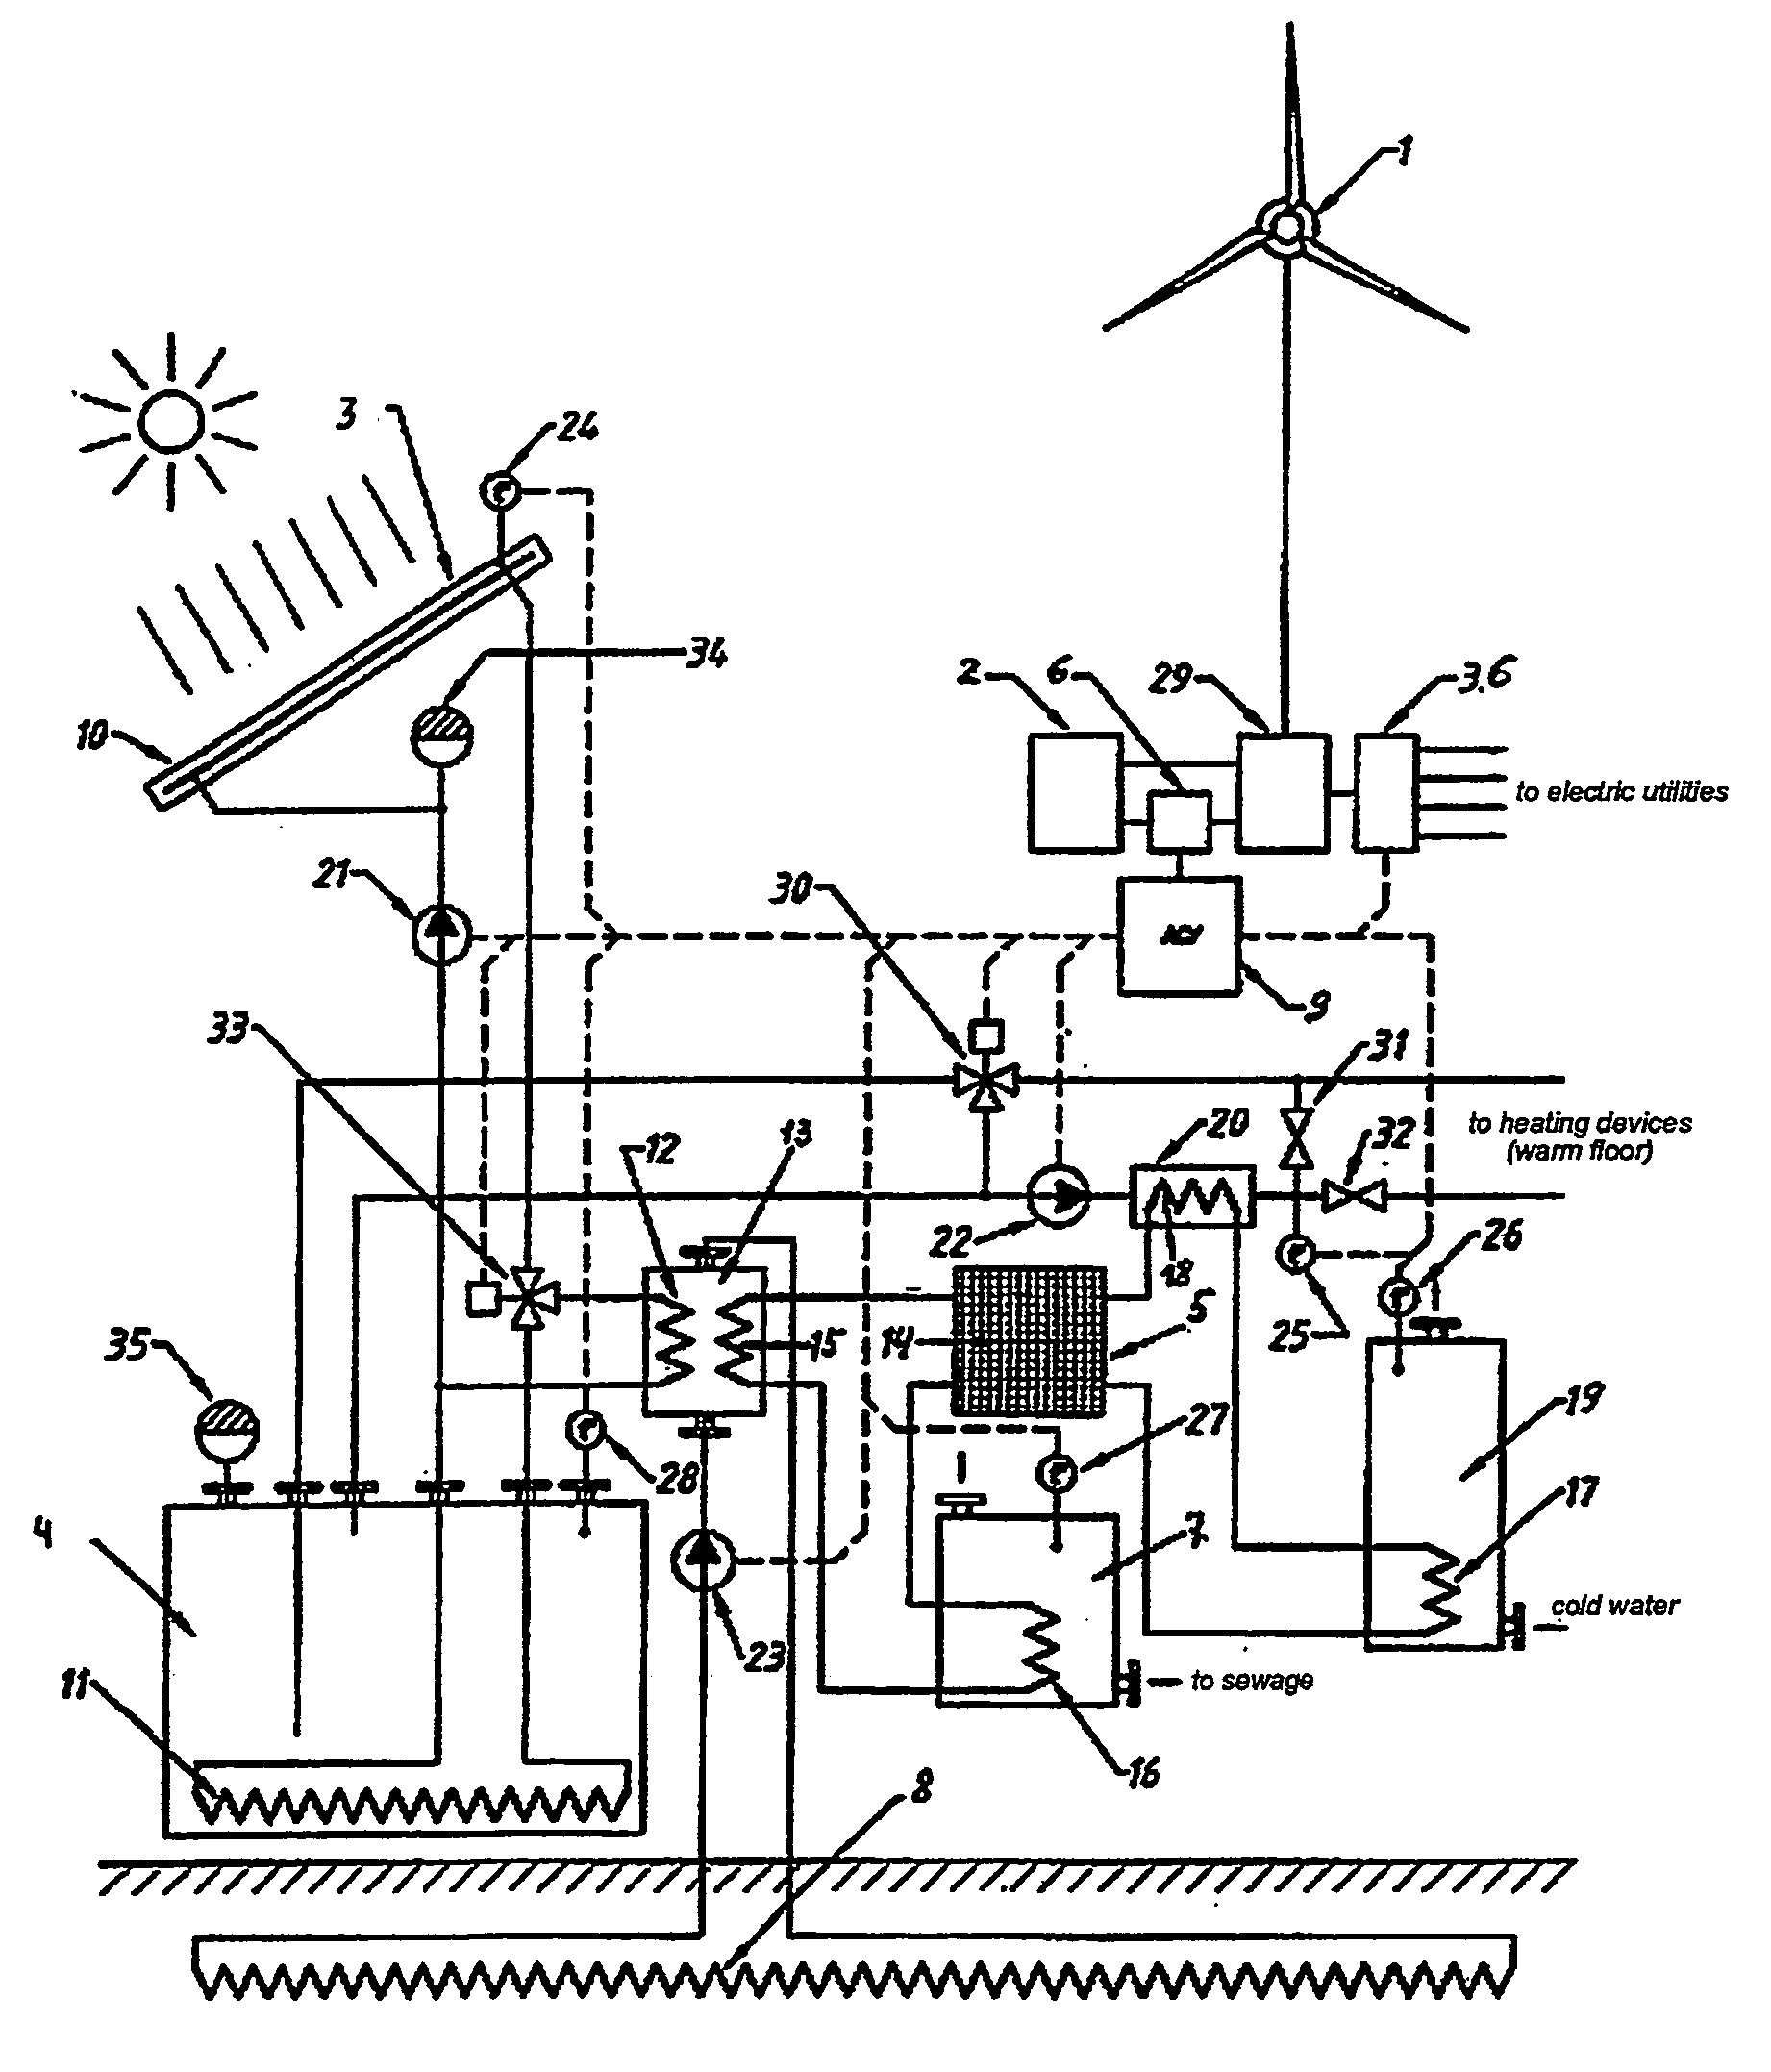 Independent system of energy and heat supply